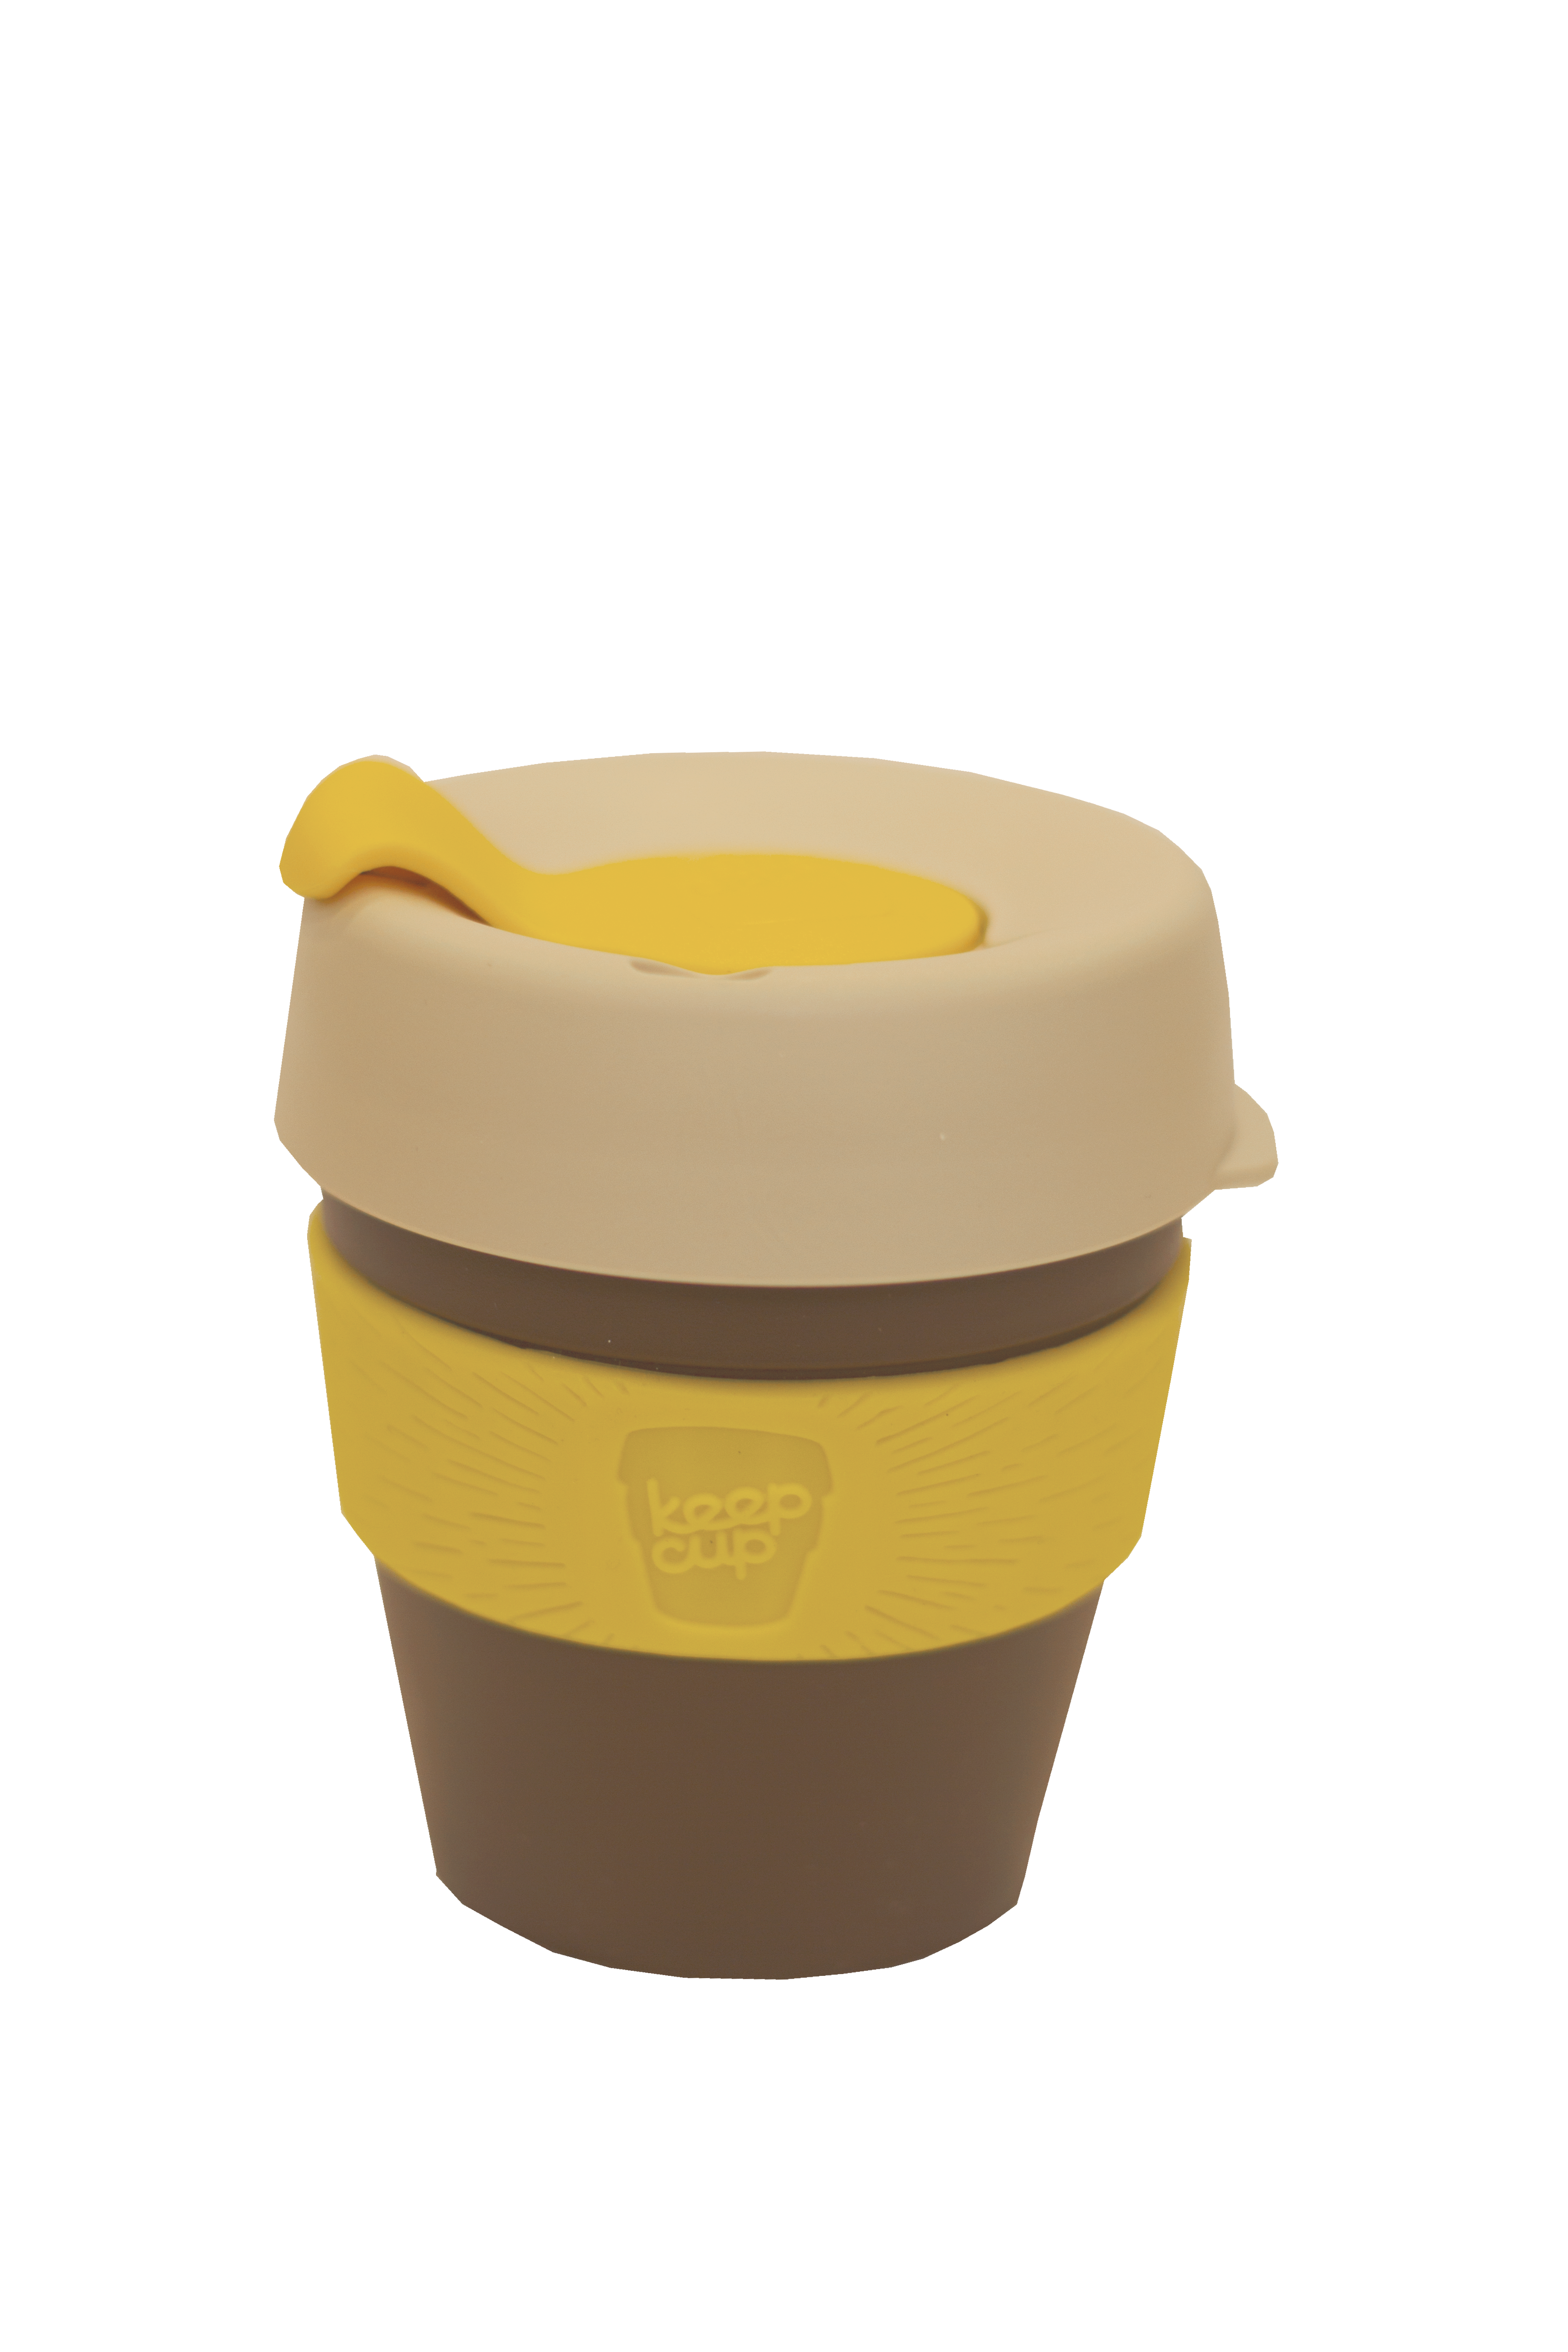 Get yourself a free. Clipart cup disposable cup